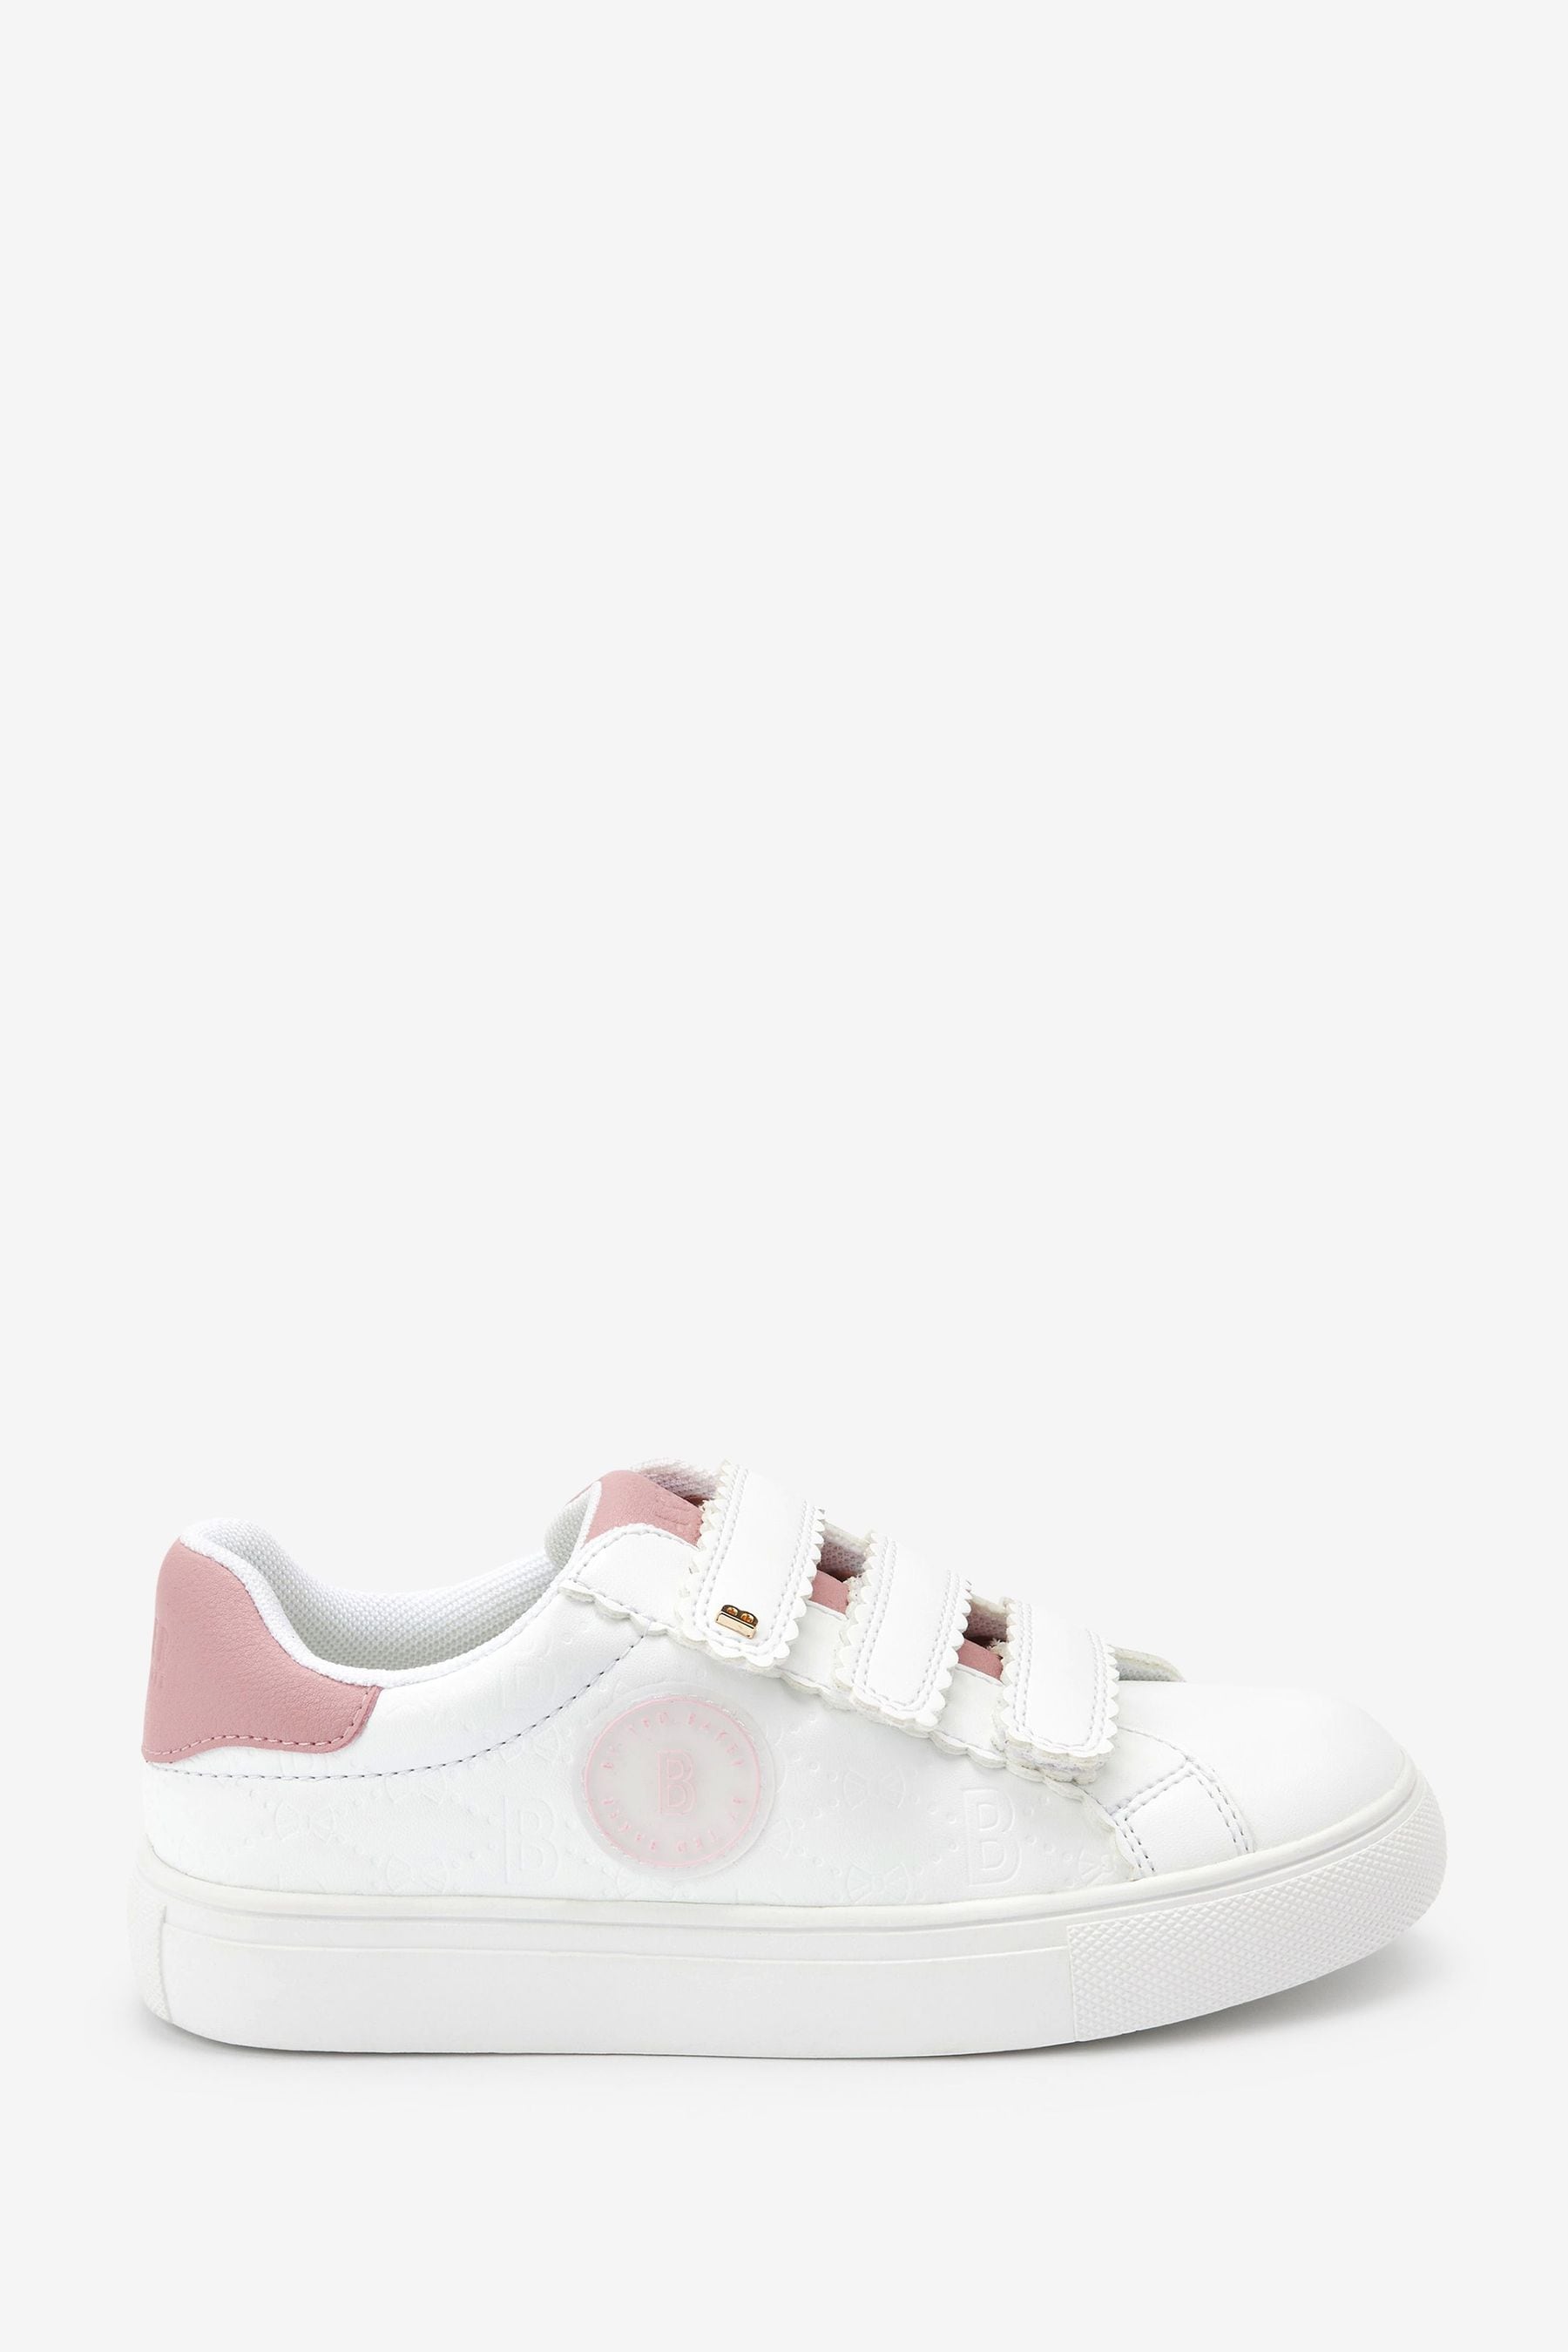 Buy Baker by Ted Baker White Chunky Trainers from the Next UK online shop